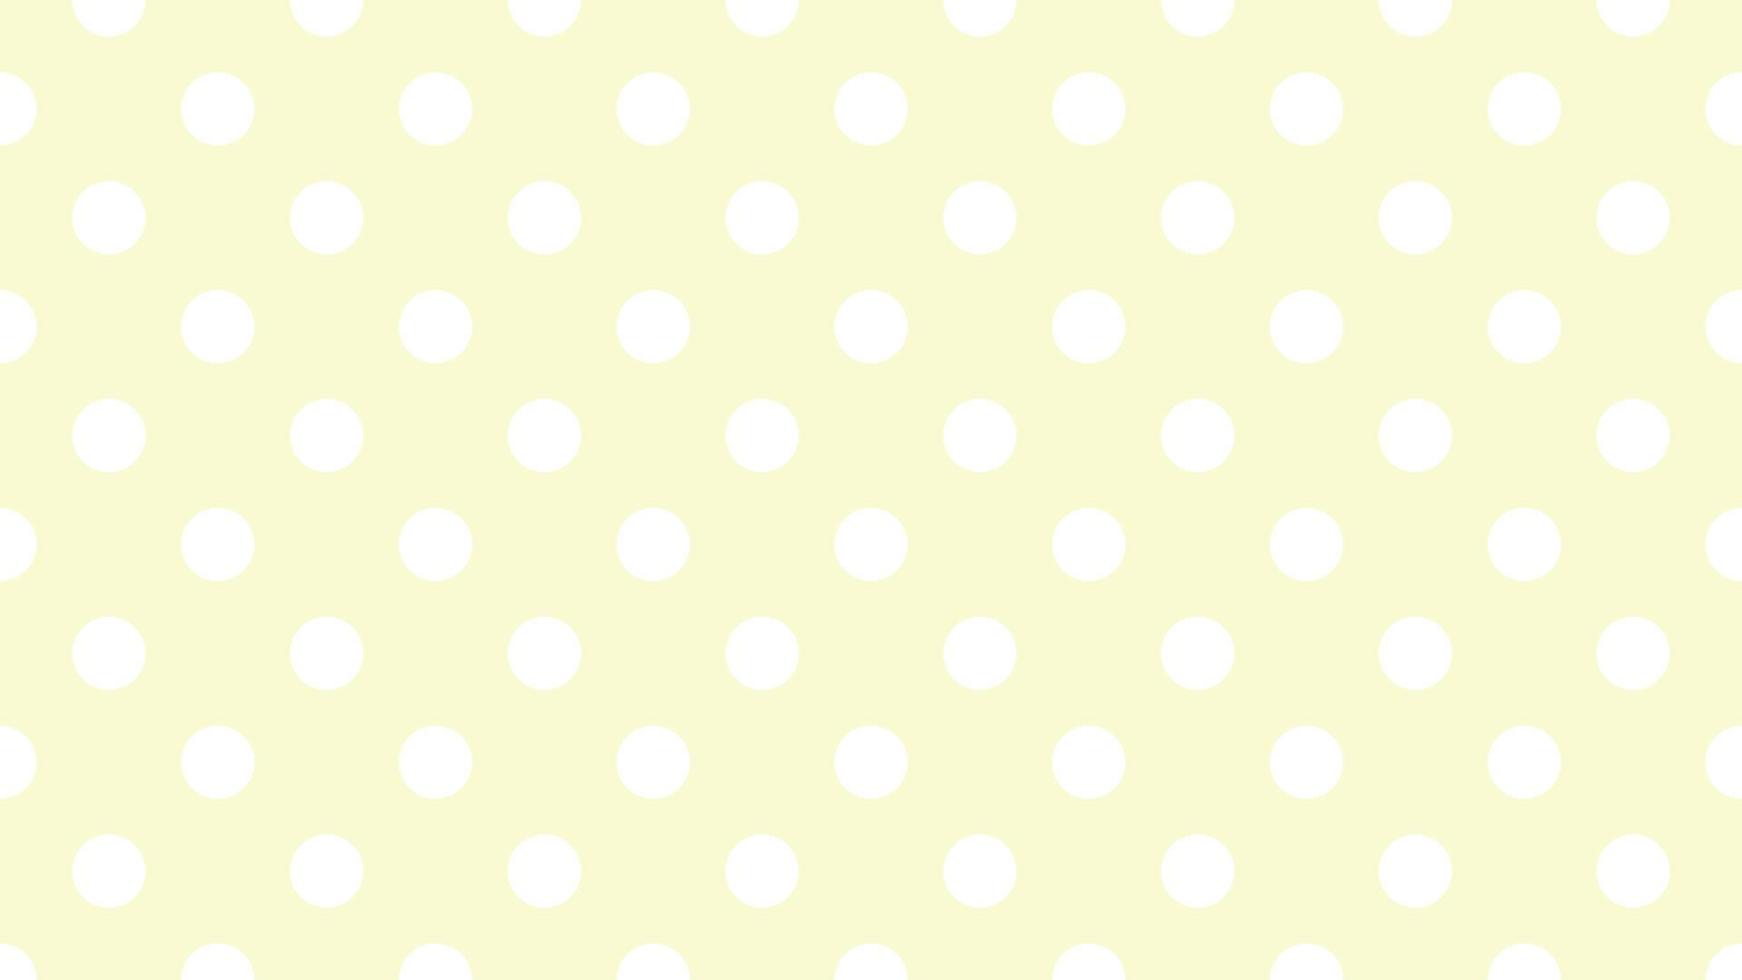 white color polka dots over light goldenrod yellow background vector